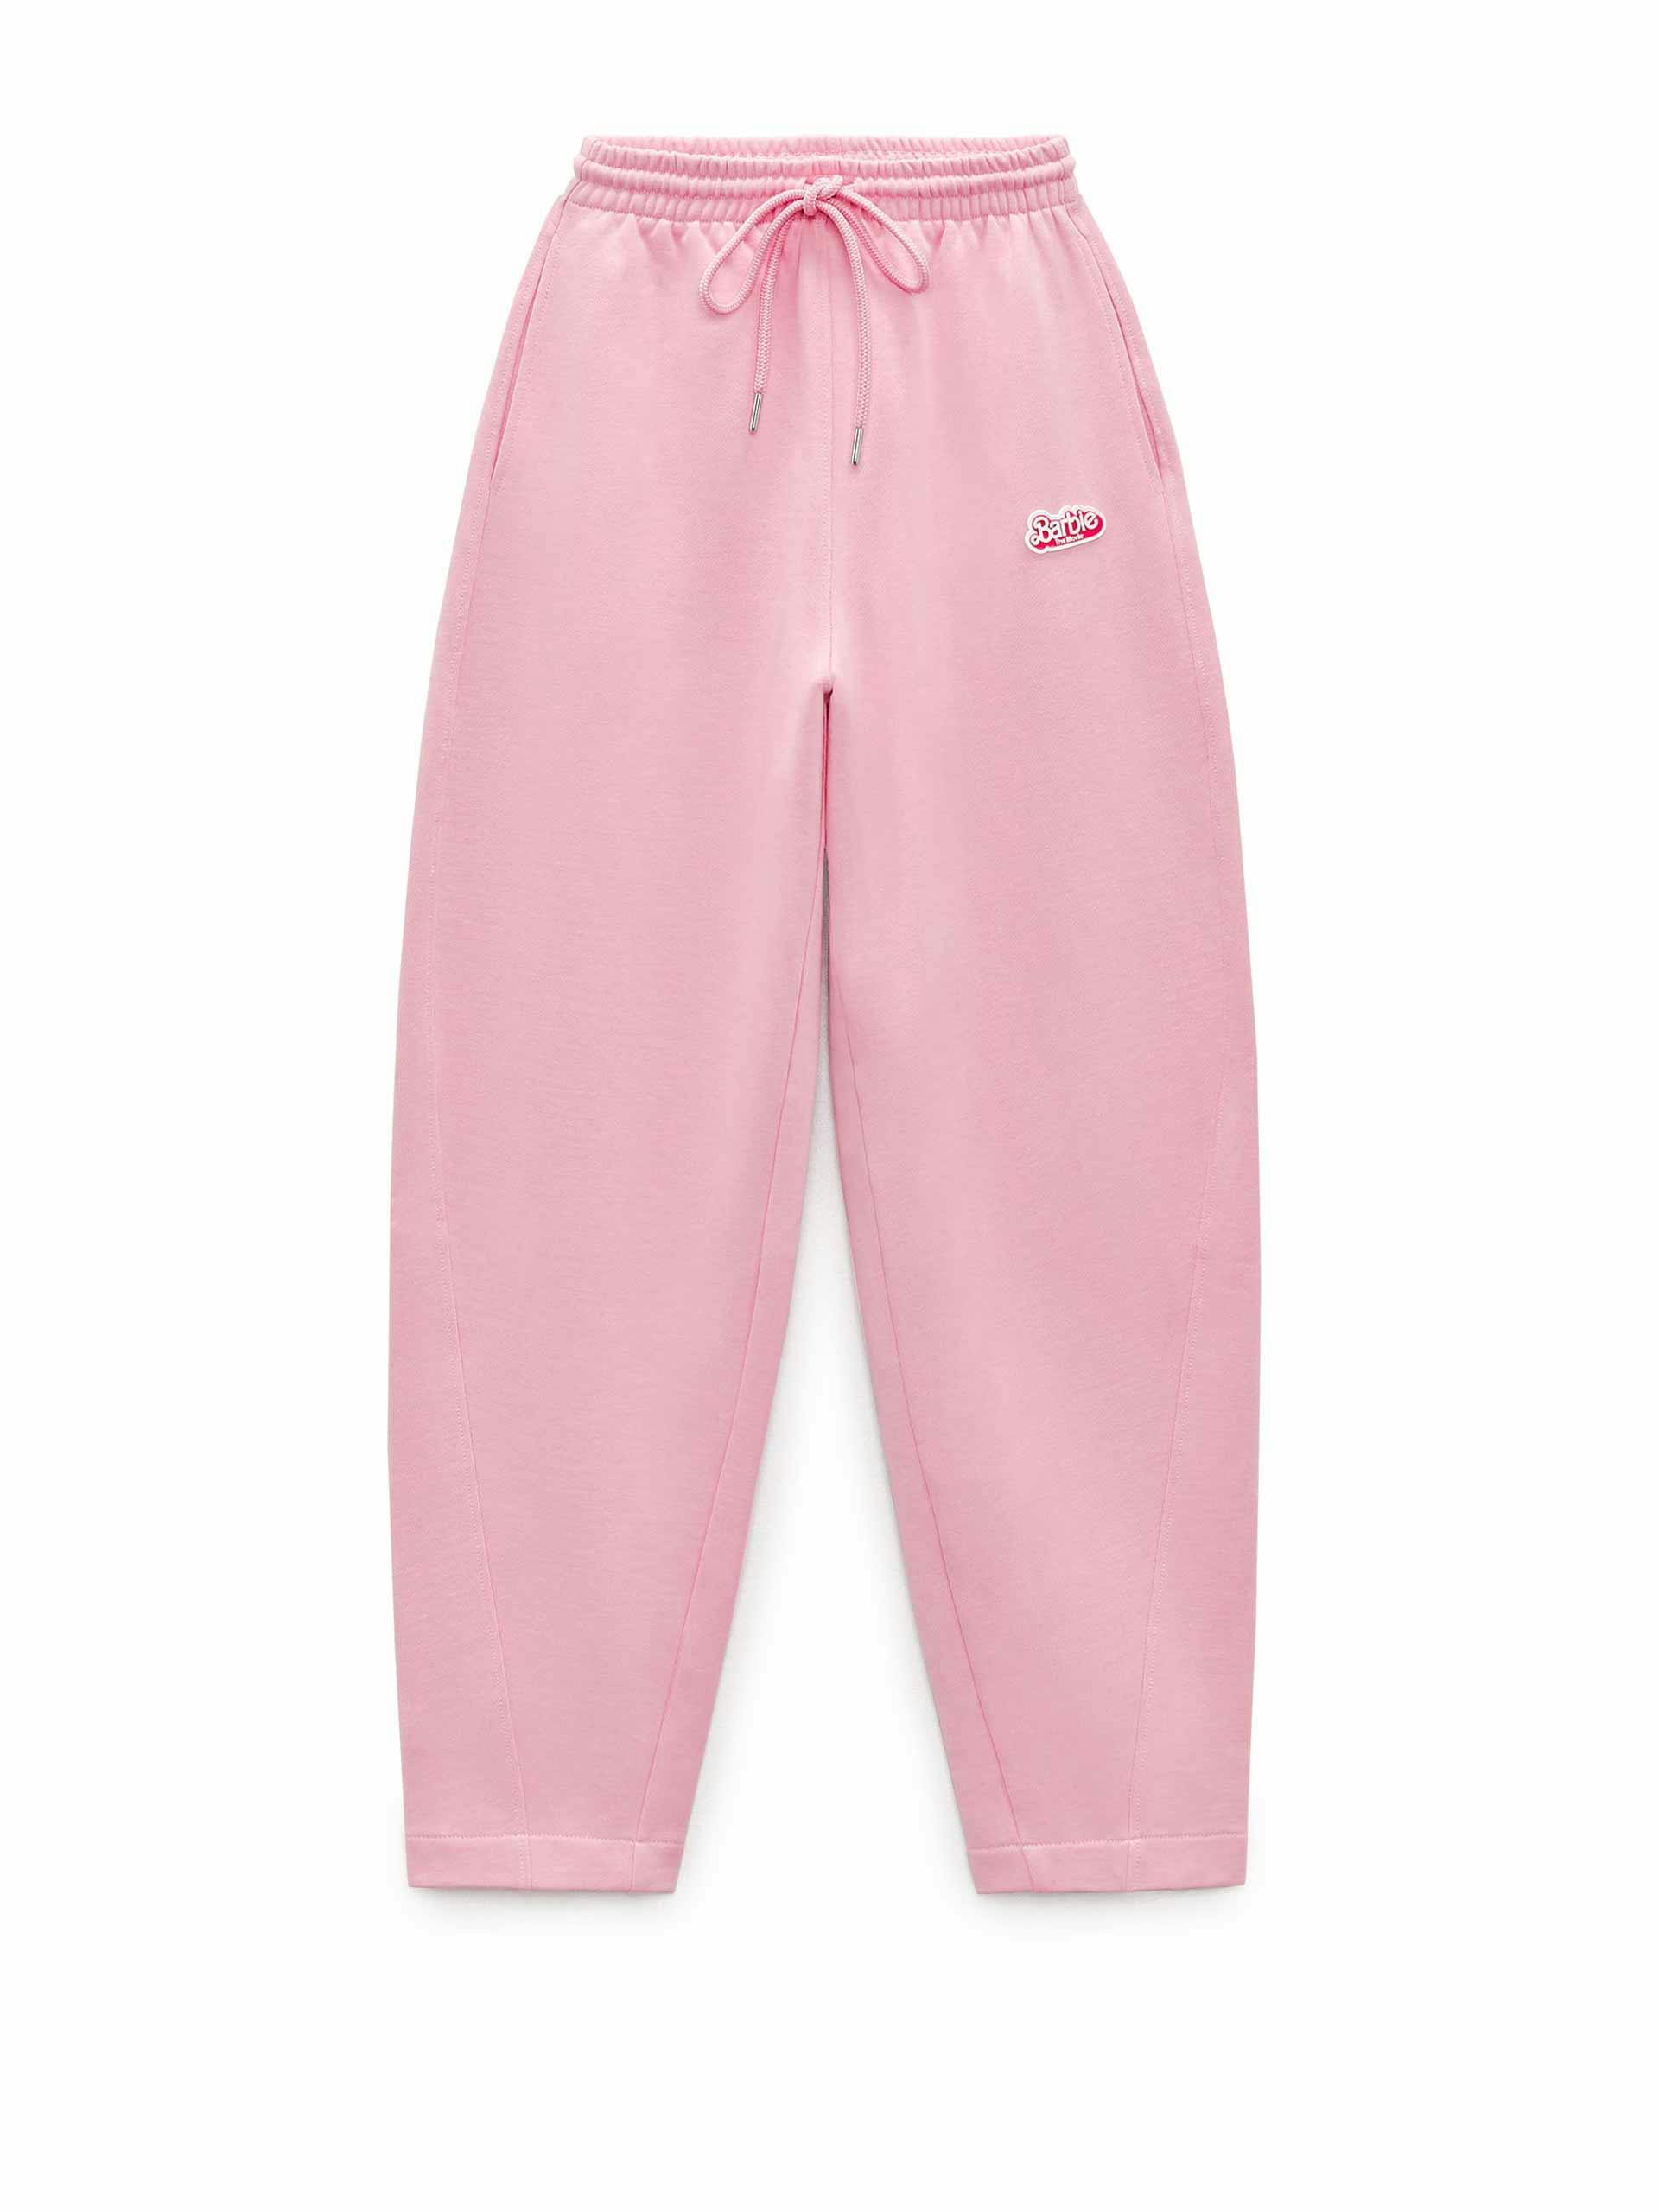 Barbie jogger trousers